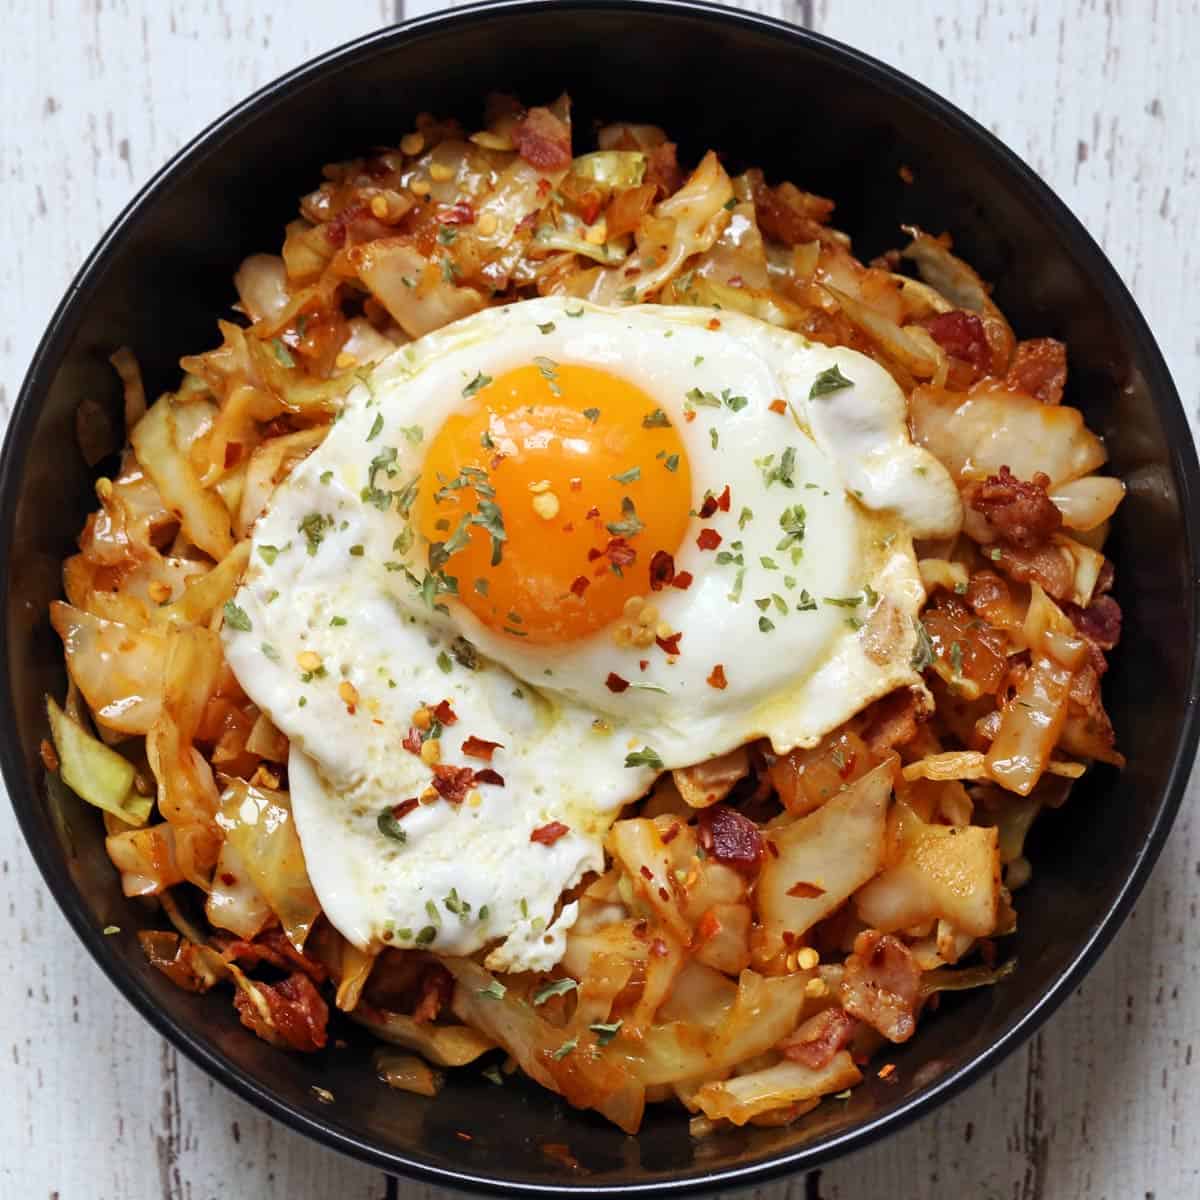 Leftover fried cabbage is topped with a fried egg.